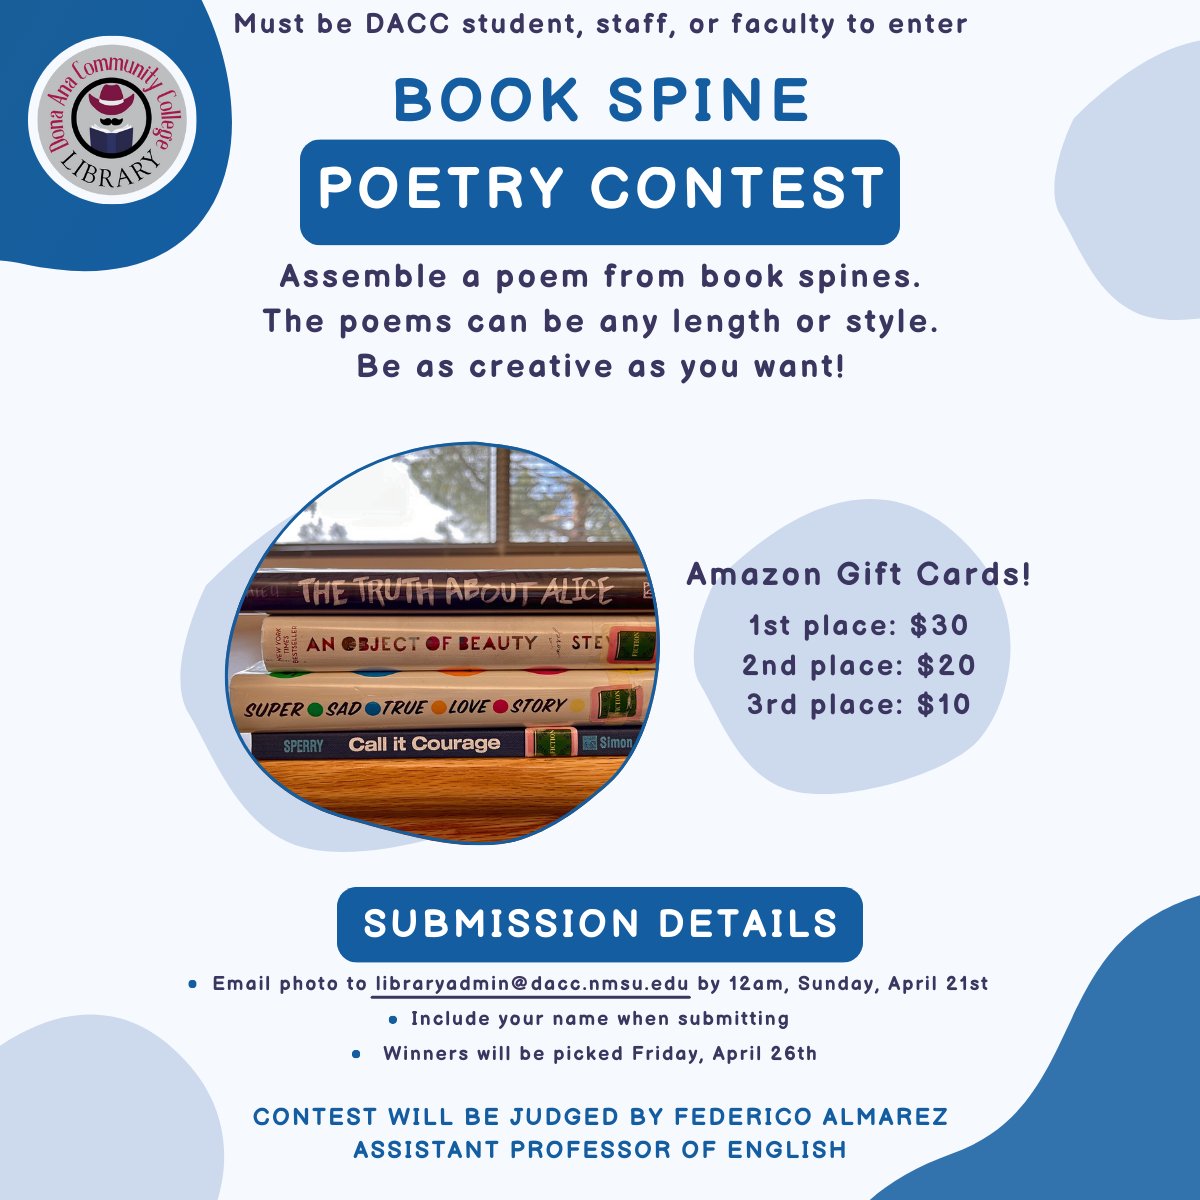 Join our Book Spine Poetry Contest. Arrange book spines to create a poem, take a photo of the spines and email it and the poem to libraryadmin@dacc.nmsu.edu by 12am, Sun. April 21st. Don't forget to include your name! Winners will be announced on Friday, April 26th. #WeAreDACC